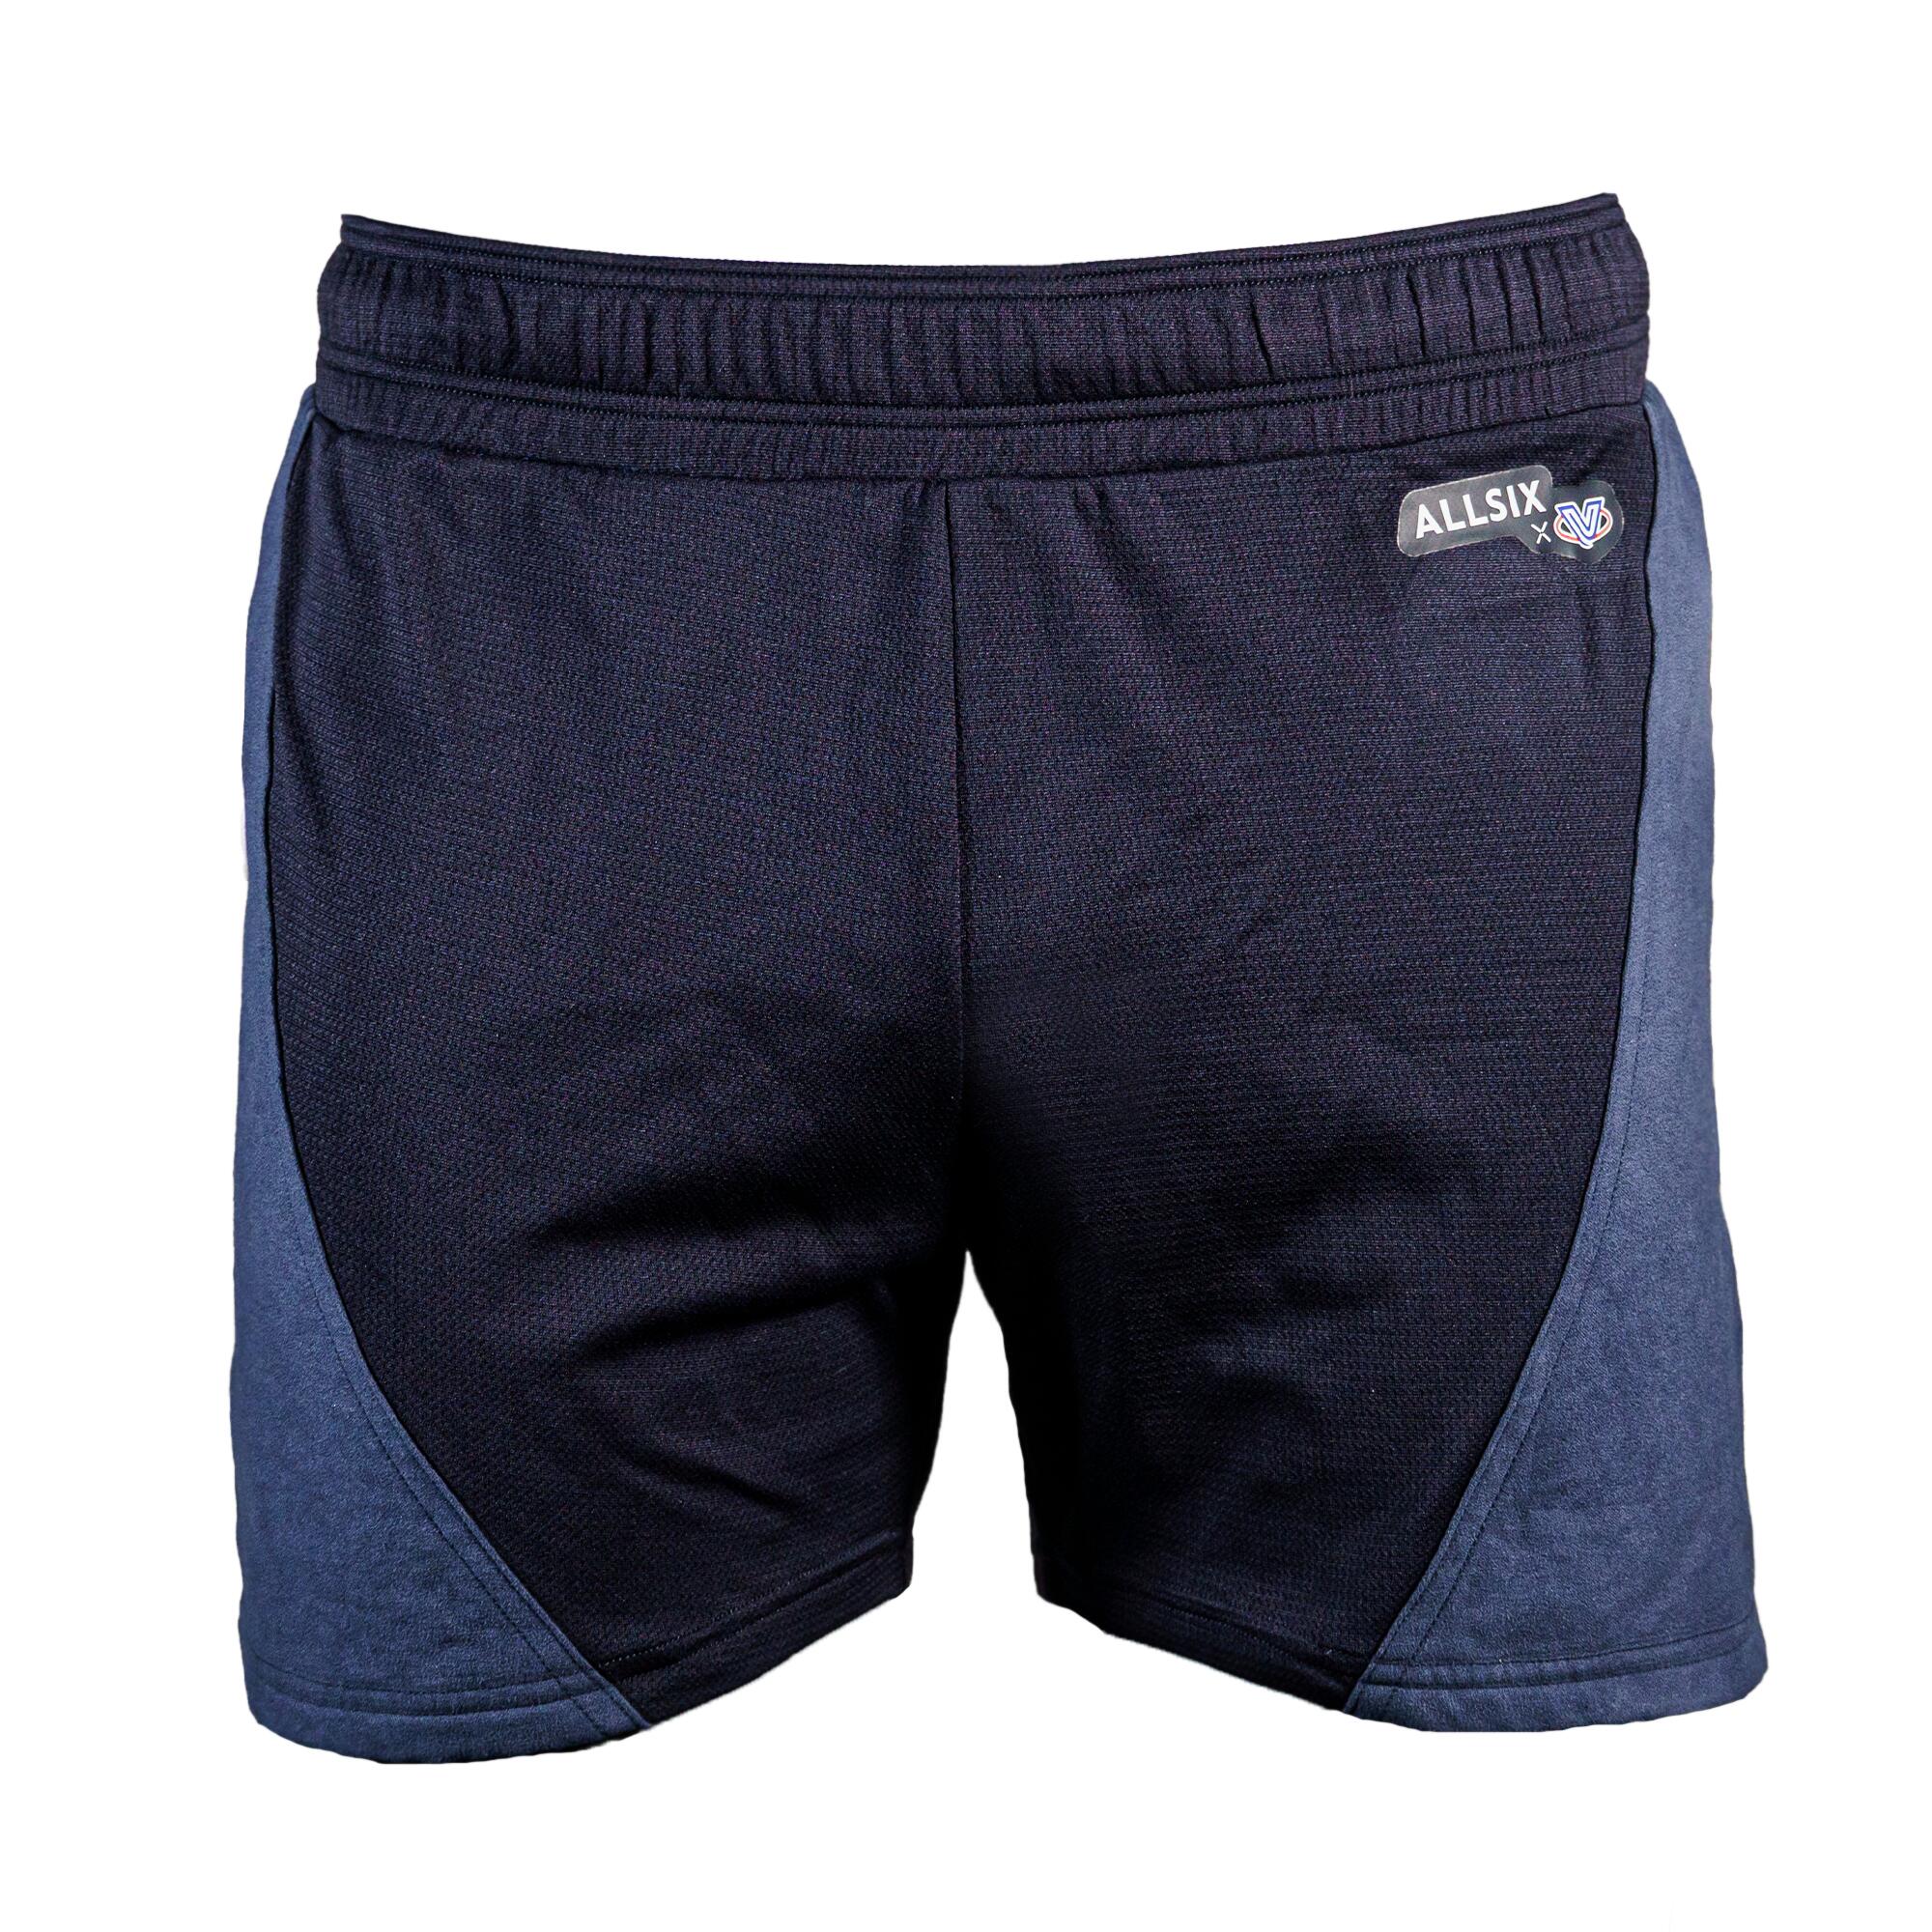 Women's Dual-Fabric Volleyball Shorts 1/5